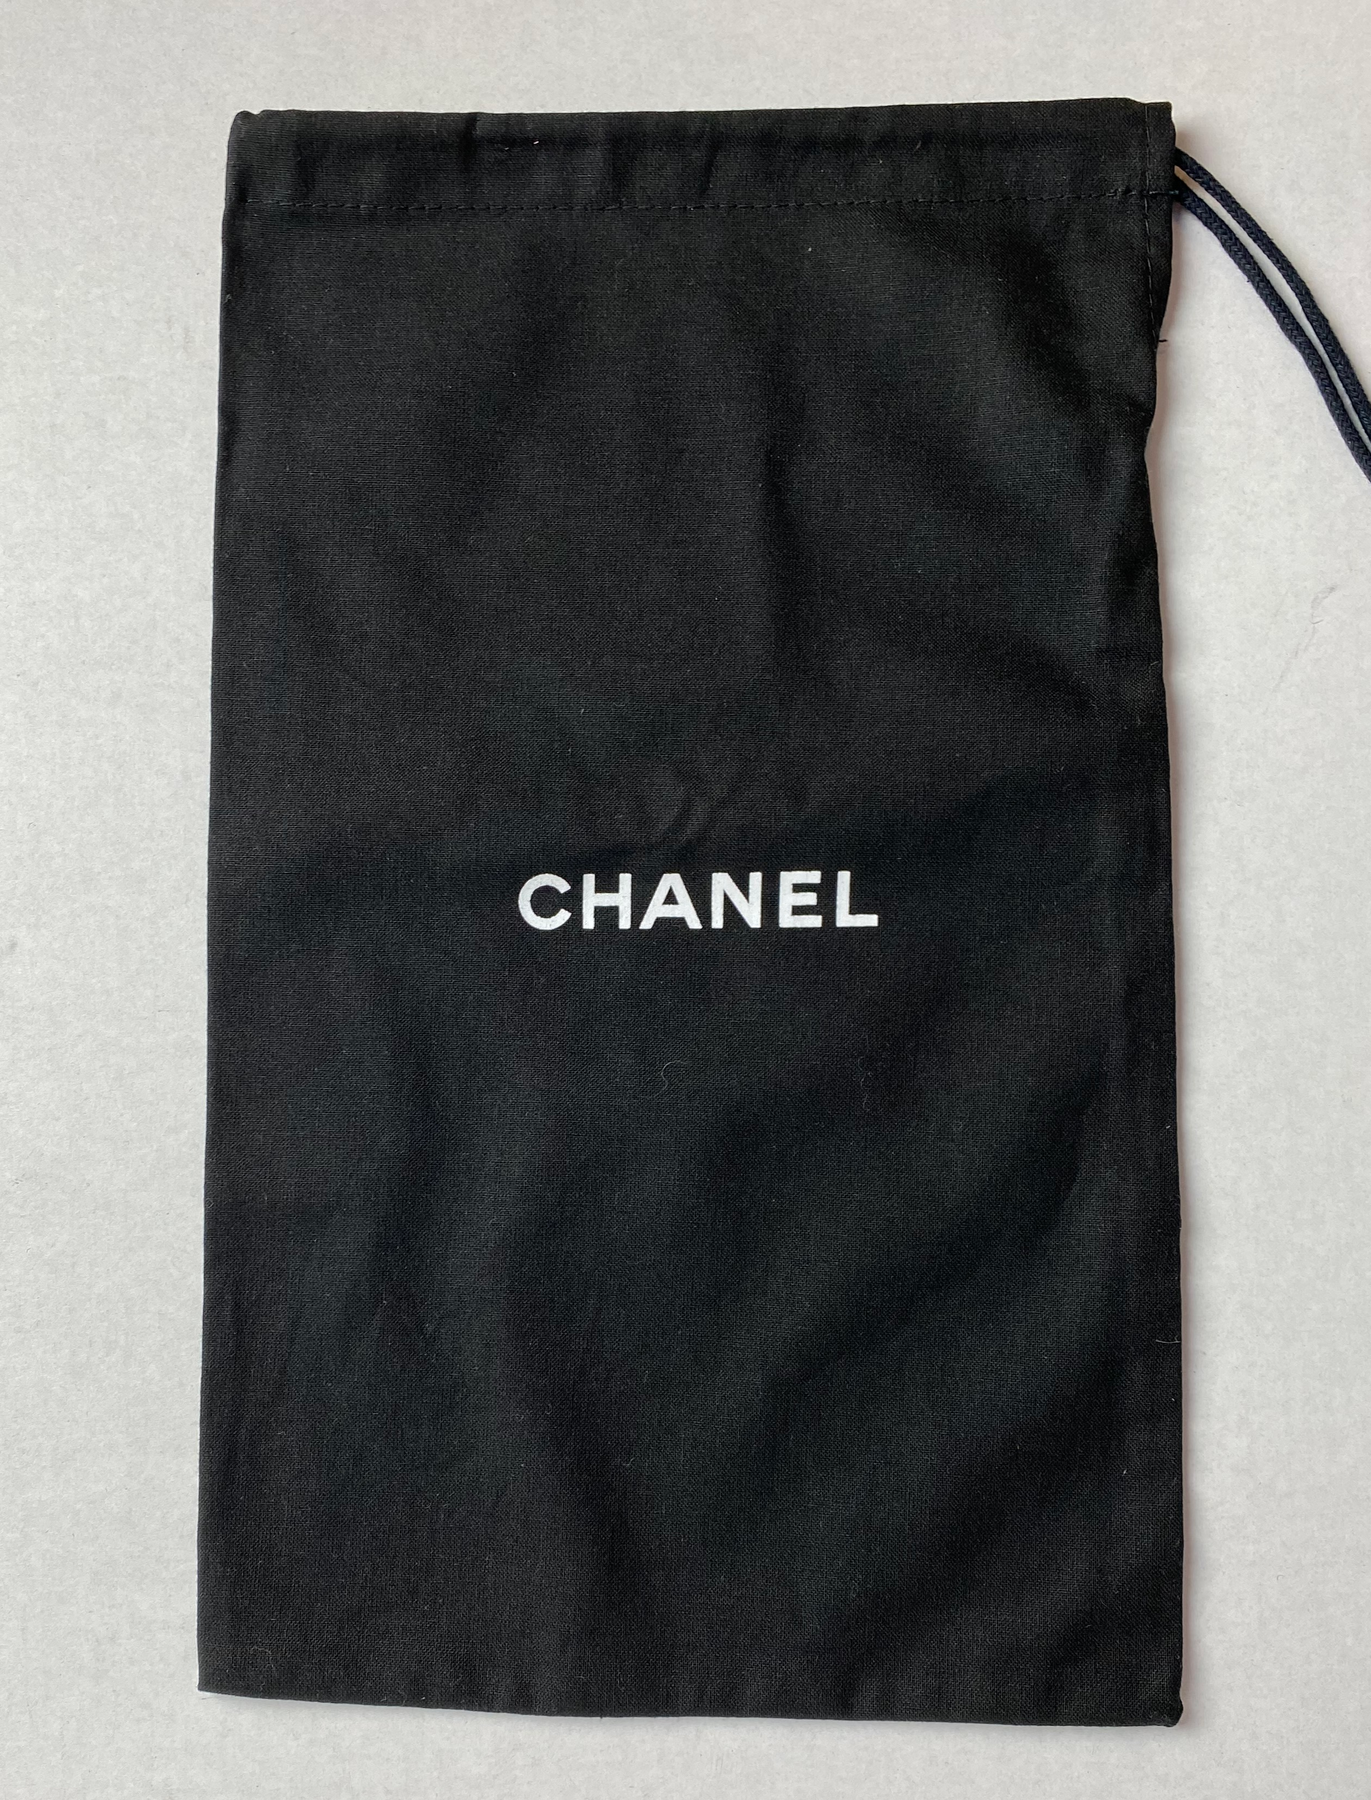 CHANEL, Accessories, Chanel Authentic Drawstring Dust Bag 55x6 Bag Only